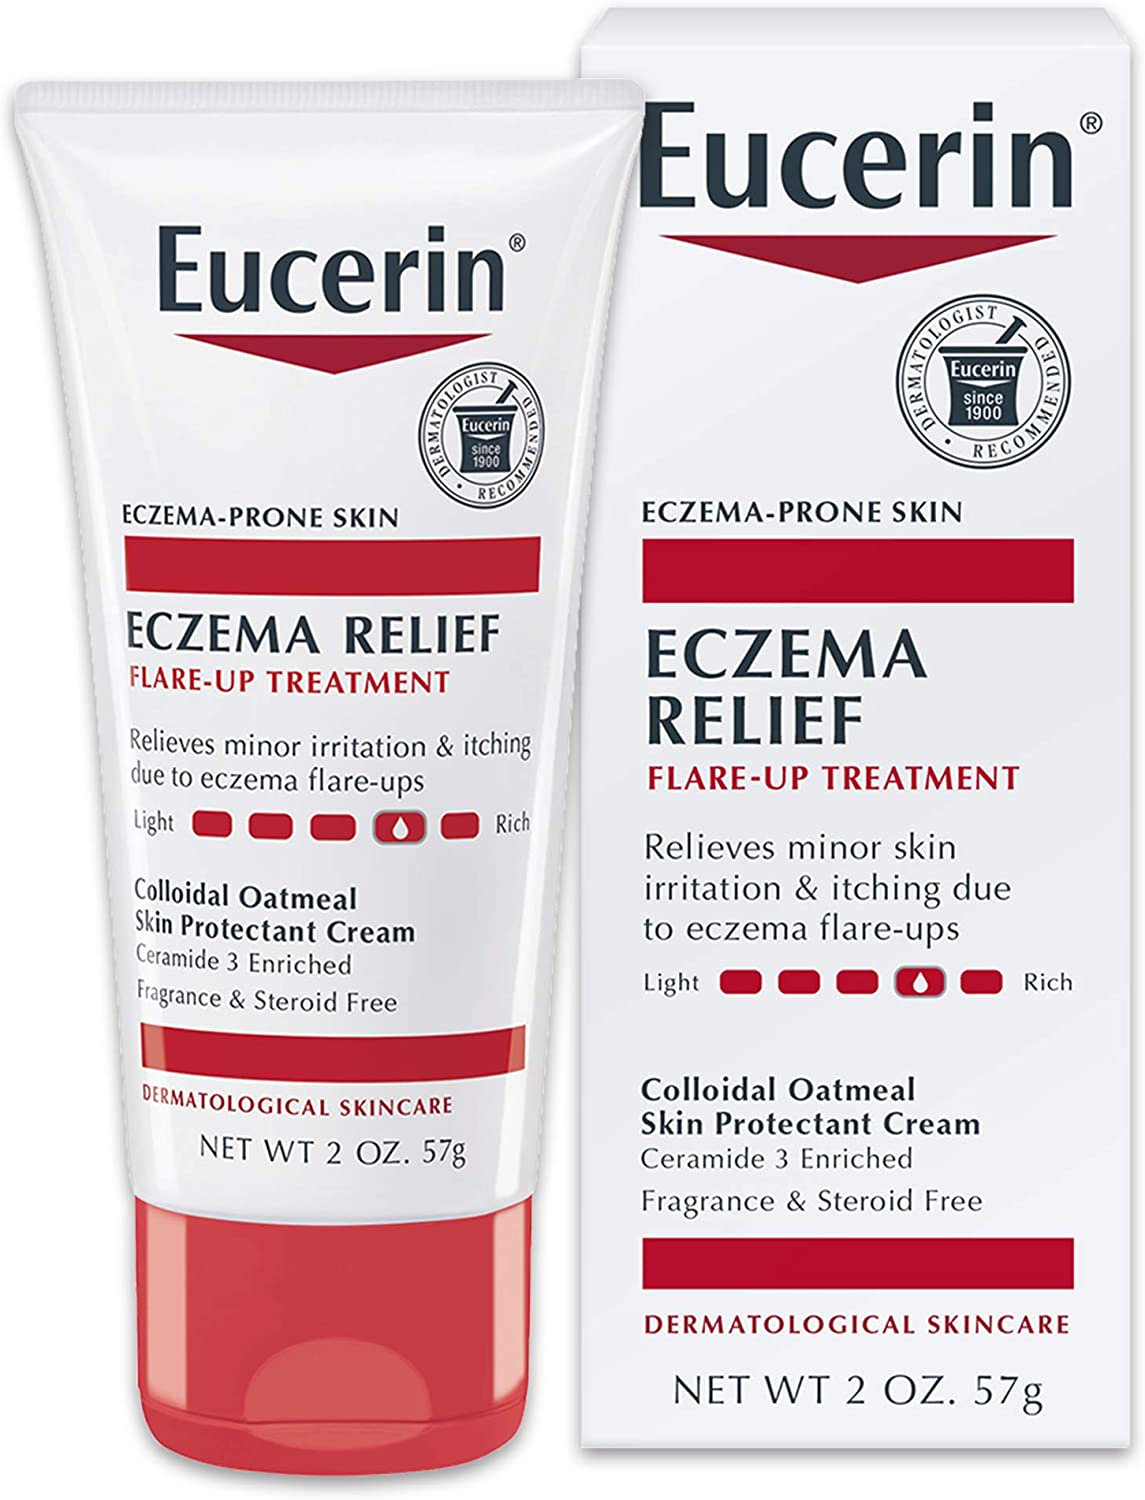 Eucerin Eczema Relief Instant Therapy Body Lotion, 2 Ounce by Beiersdorf, Inc.